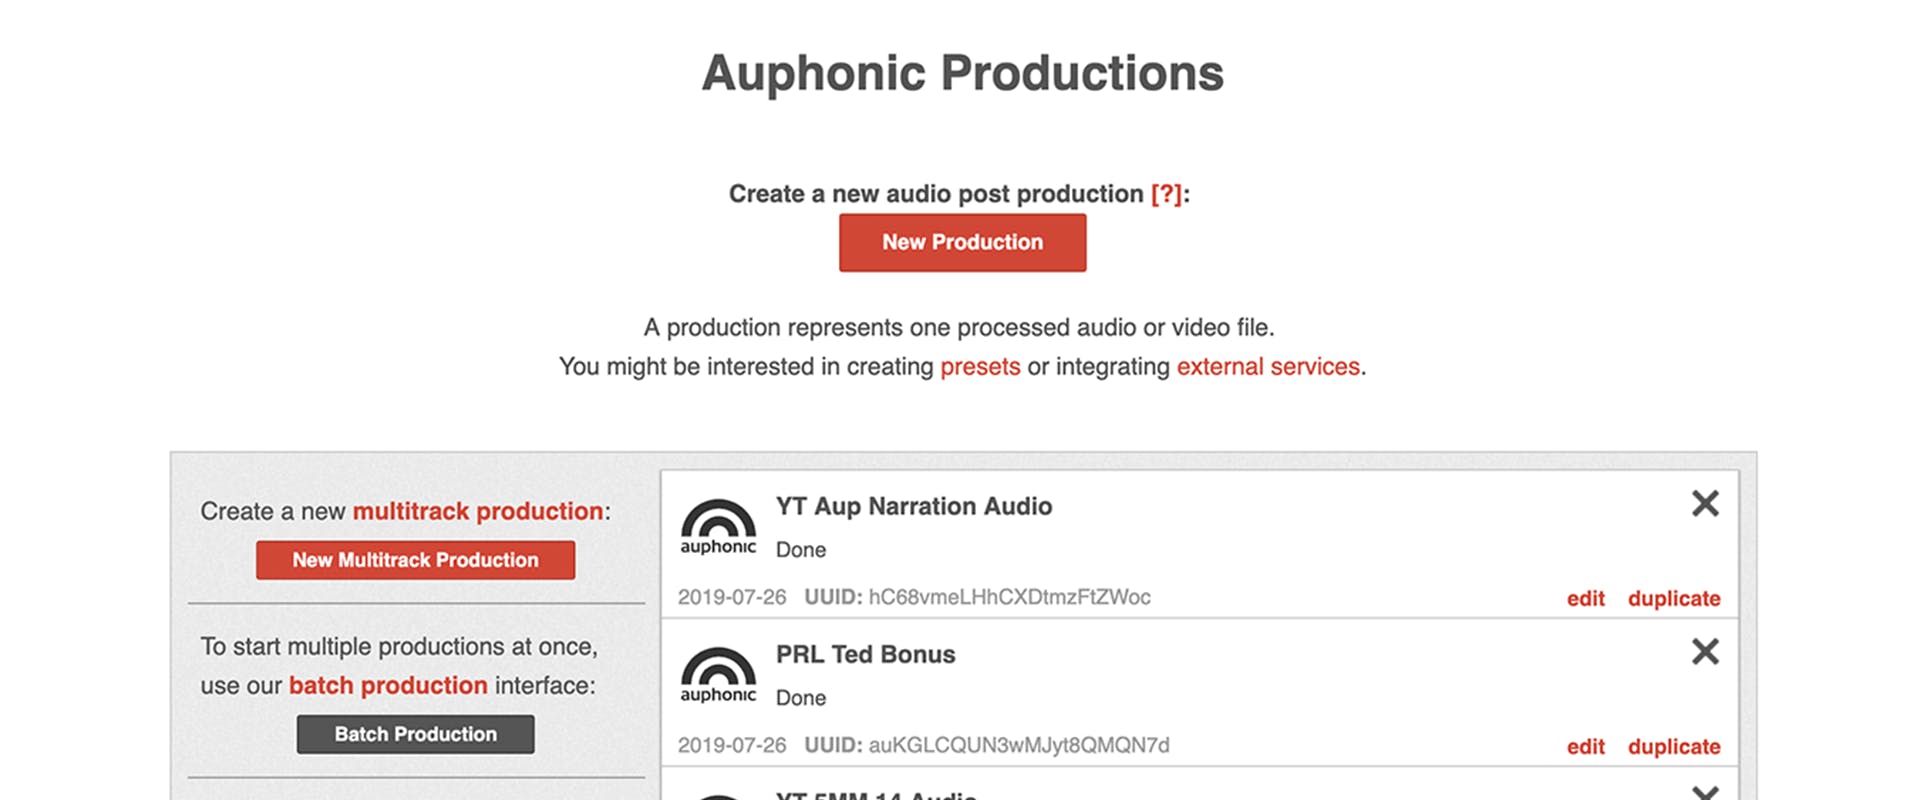 The Complete Guide To Auphonic For Podcasters